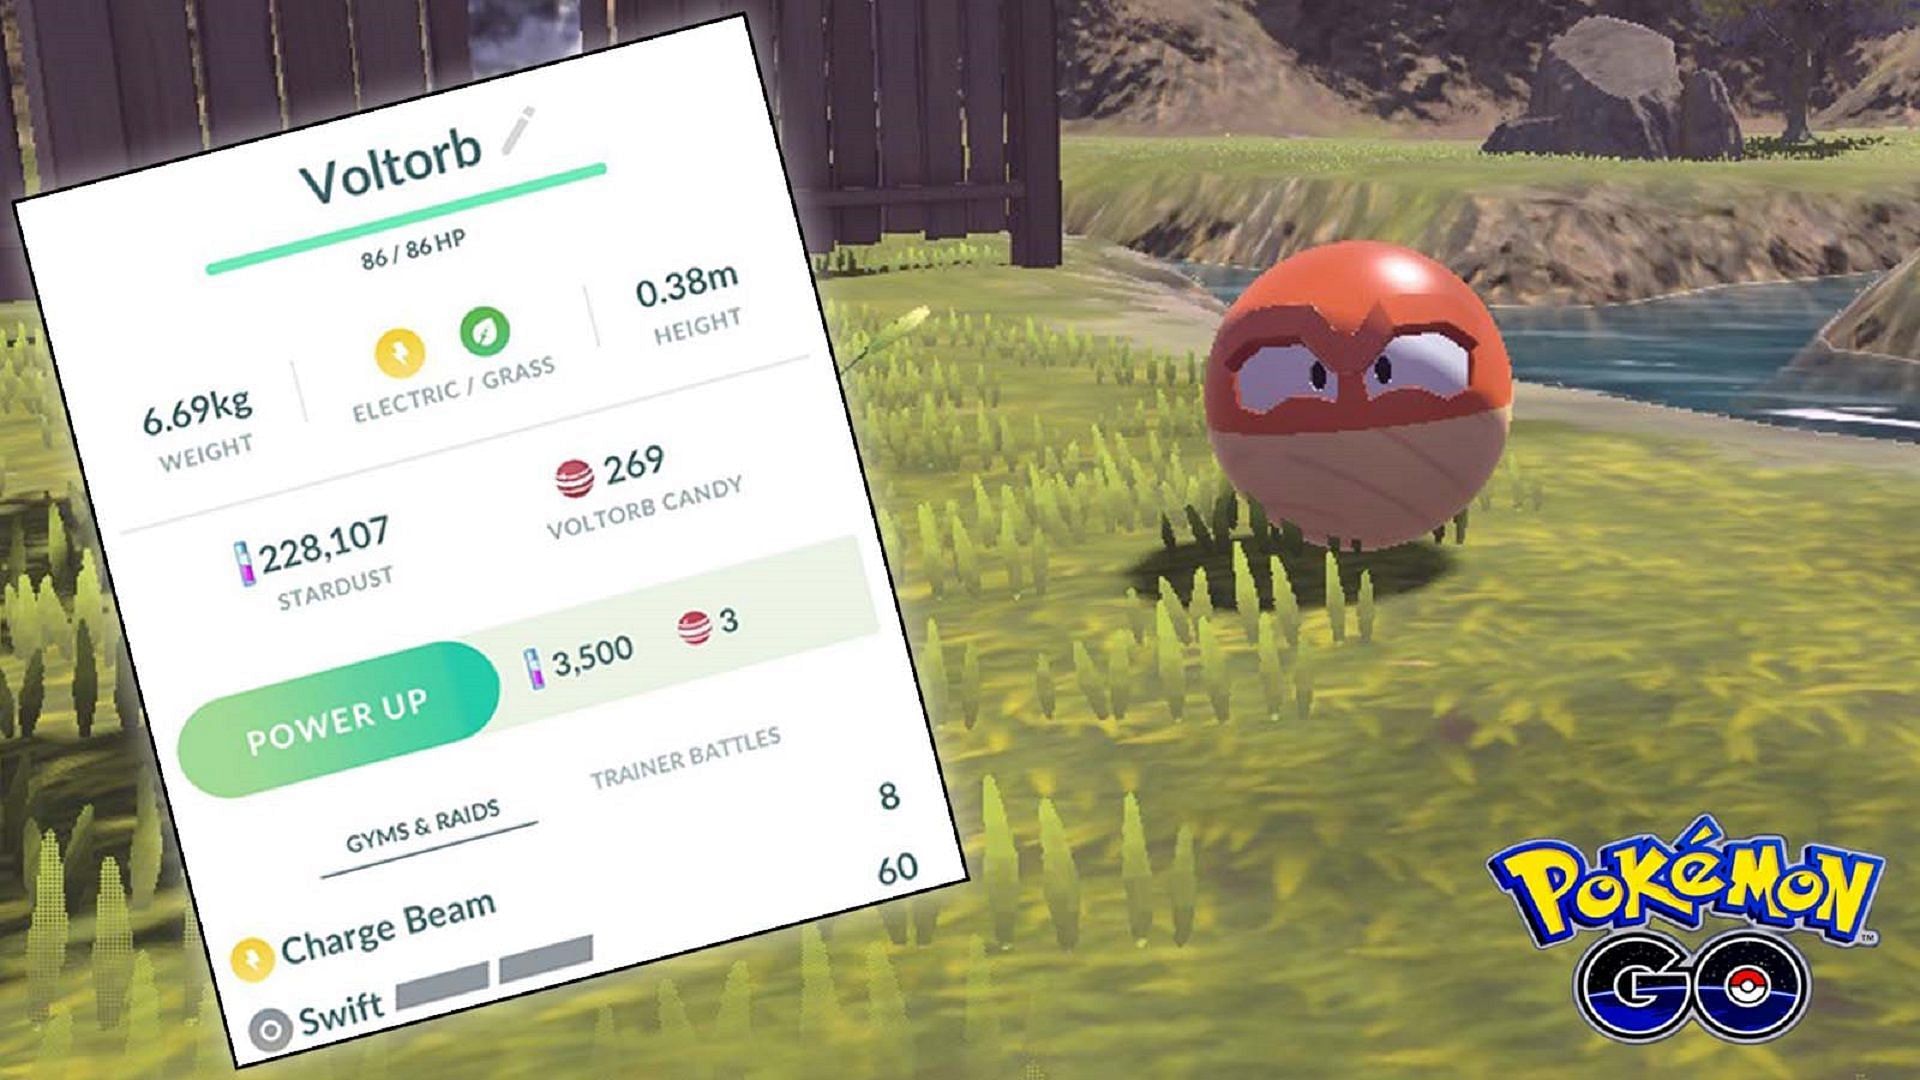 Shiny Hisuian Voltorb is not yet available in Pokemon GO